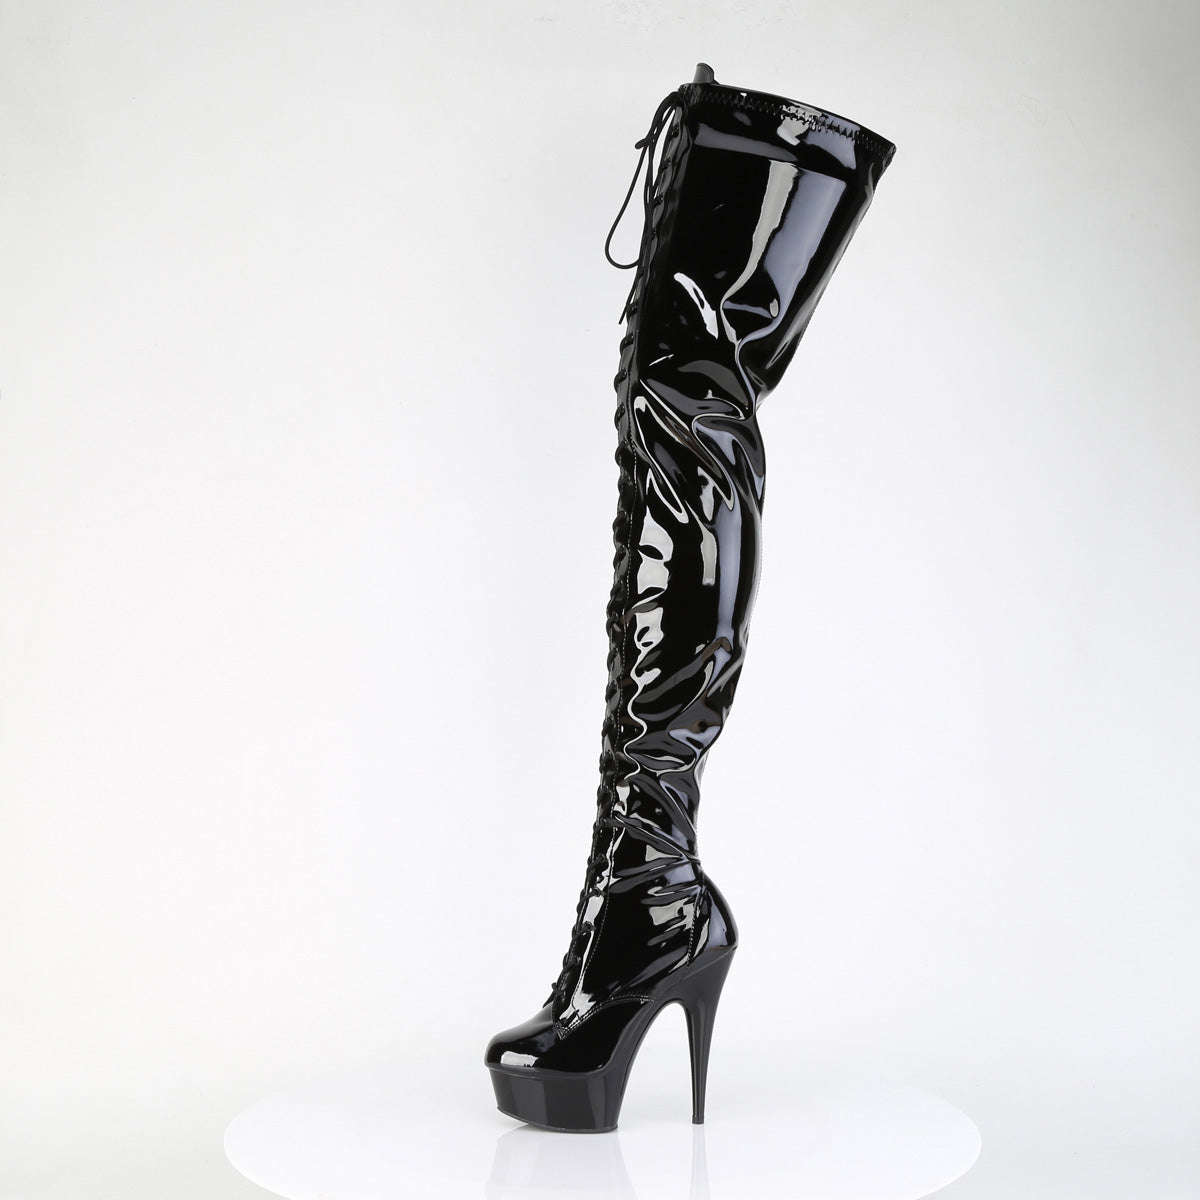 DELIGHT-4023 Black Patent Pleaser Pole Dancing Thigh Highs Boots